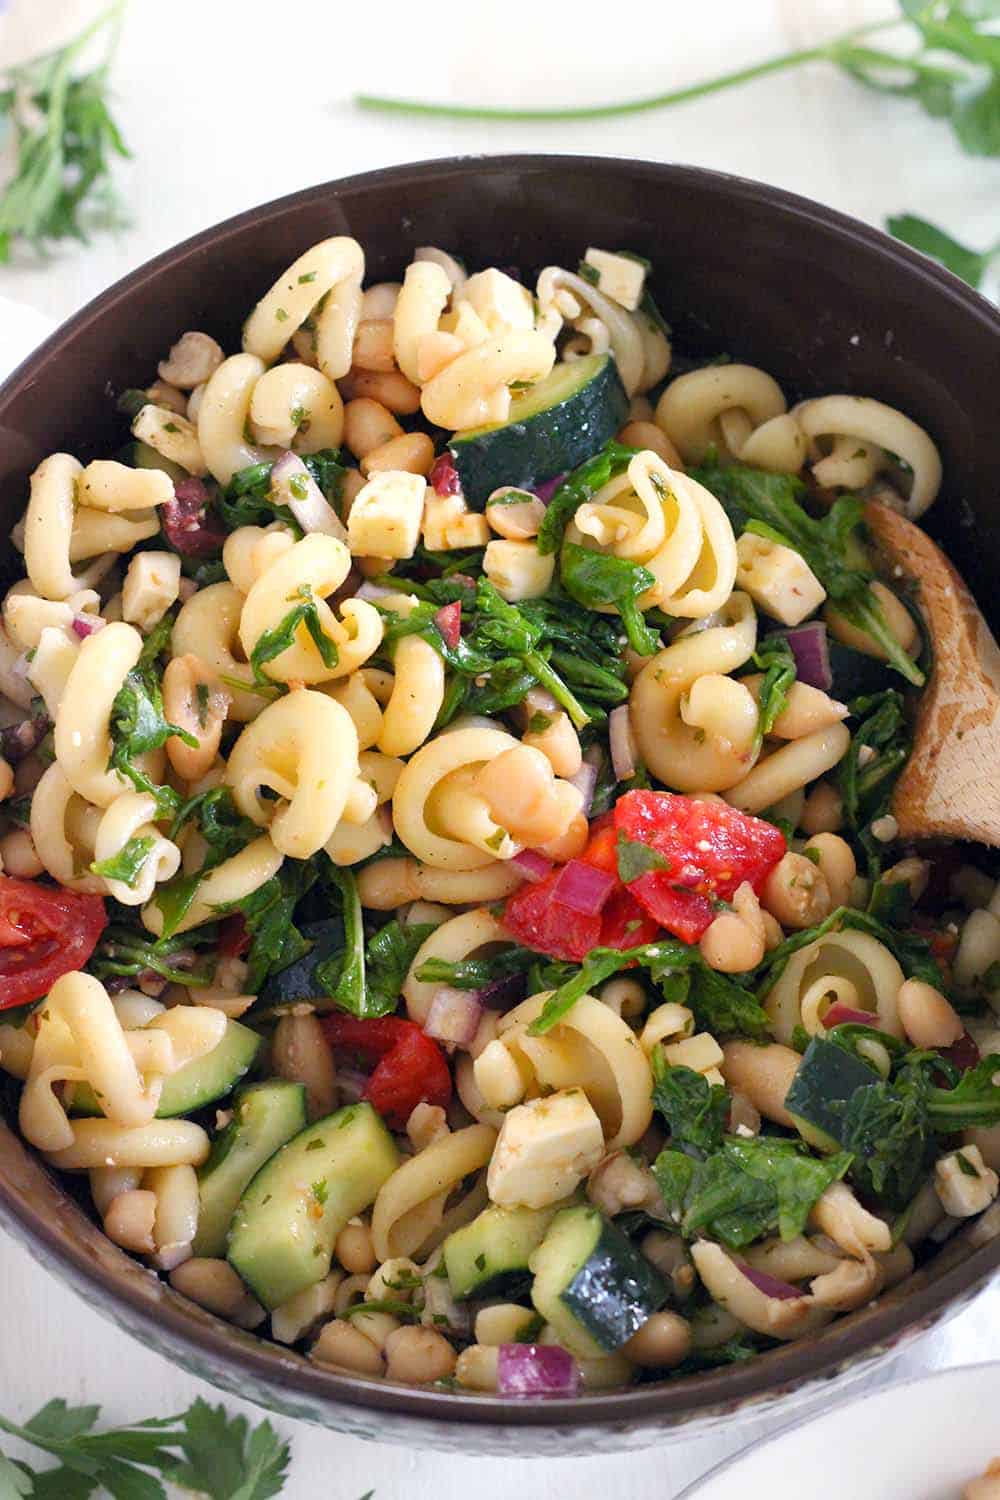 This refreshing Greek Pasta Salad with Herb Vinaigrette recipe is packed with healthy ingredients like white beans, arugula, and fresh veggies. The perfect Mediterranean vegetarian meal or side!